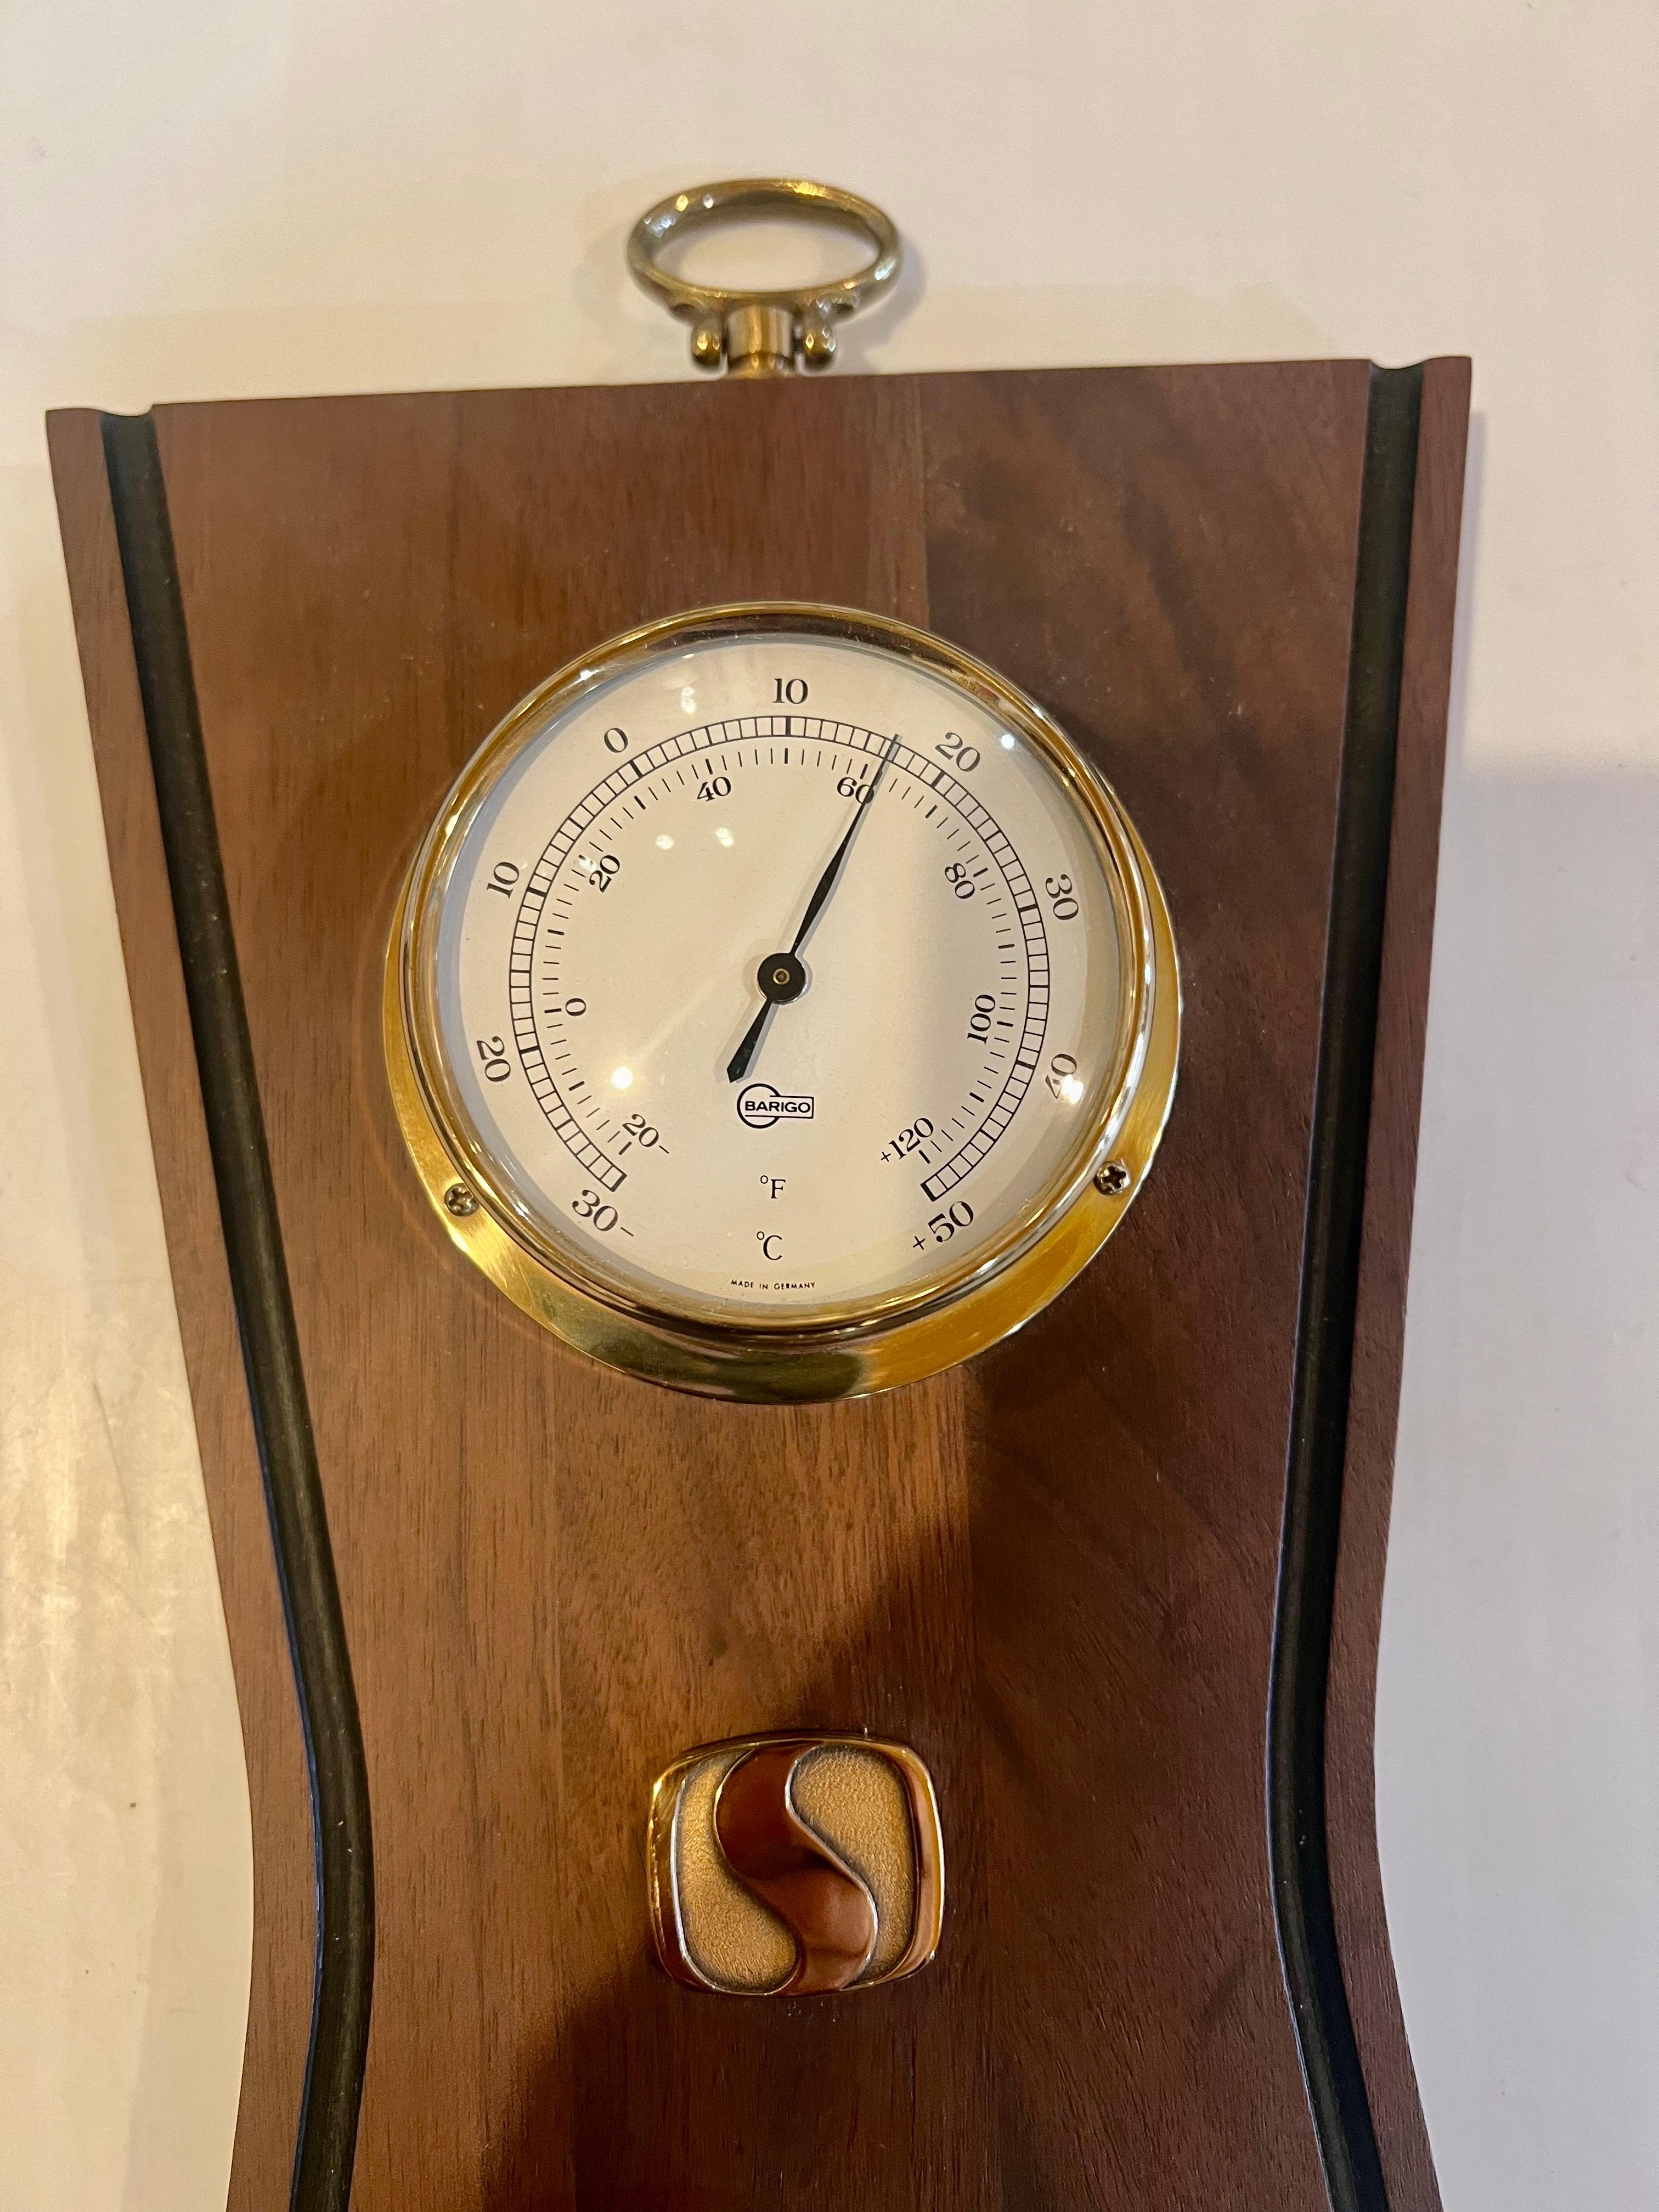 Beautiful weather station made by Barigo mounted on solid walnut frame excellent condition top quality piece working like new , 